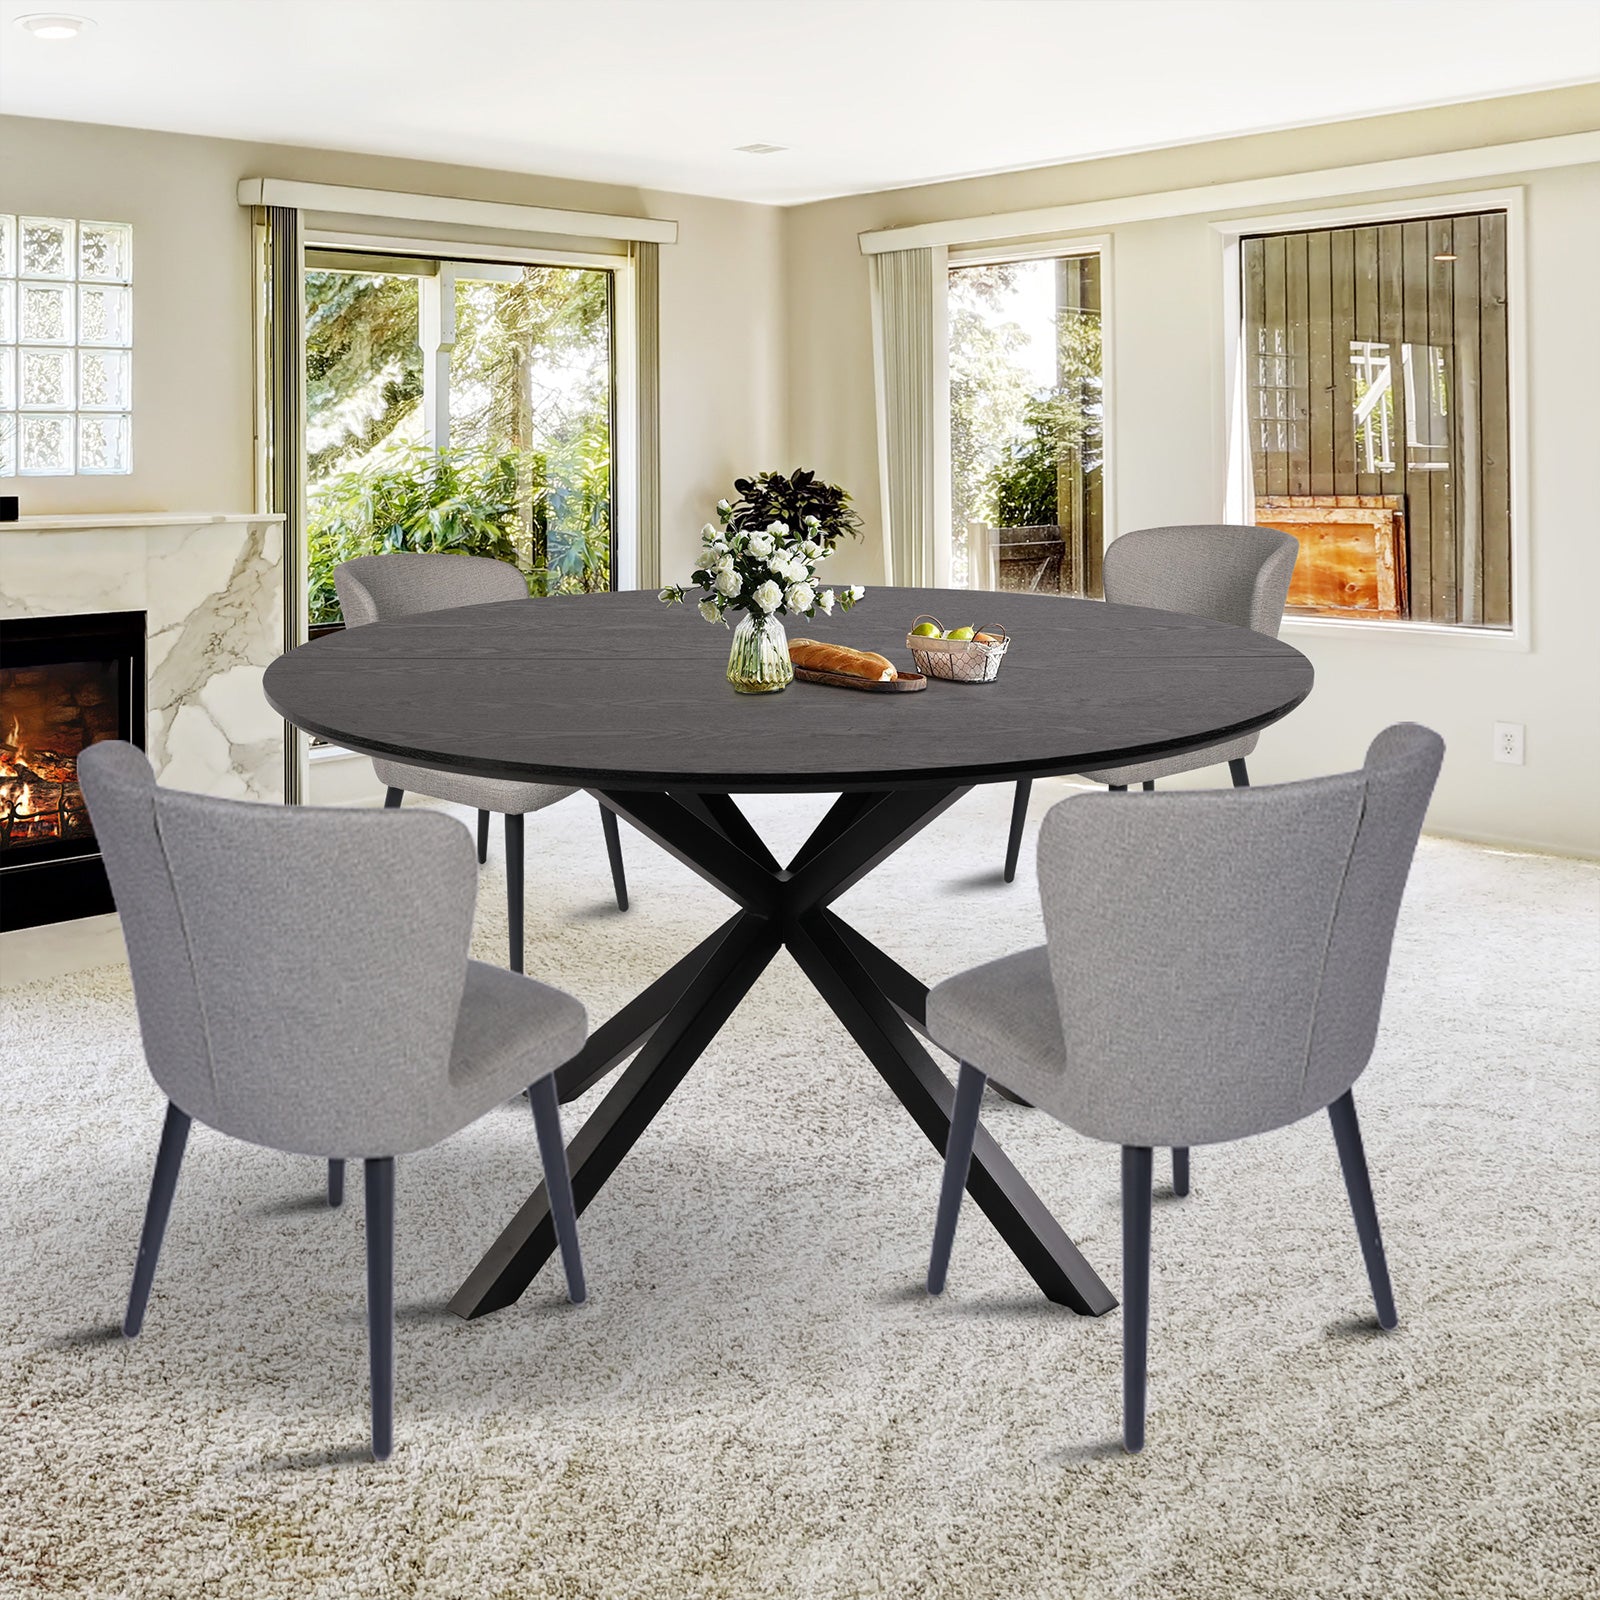 53" Mid-Century Modern Round Dining Room Table for 4-6 Person W/Solid Metal Legs, Black Wood Grain